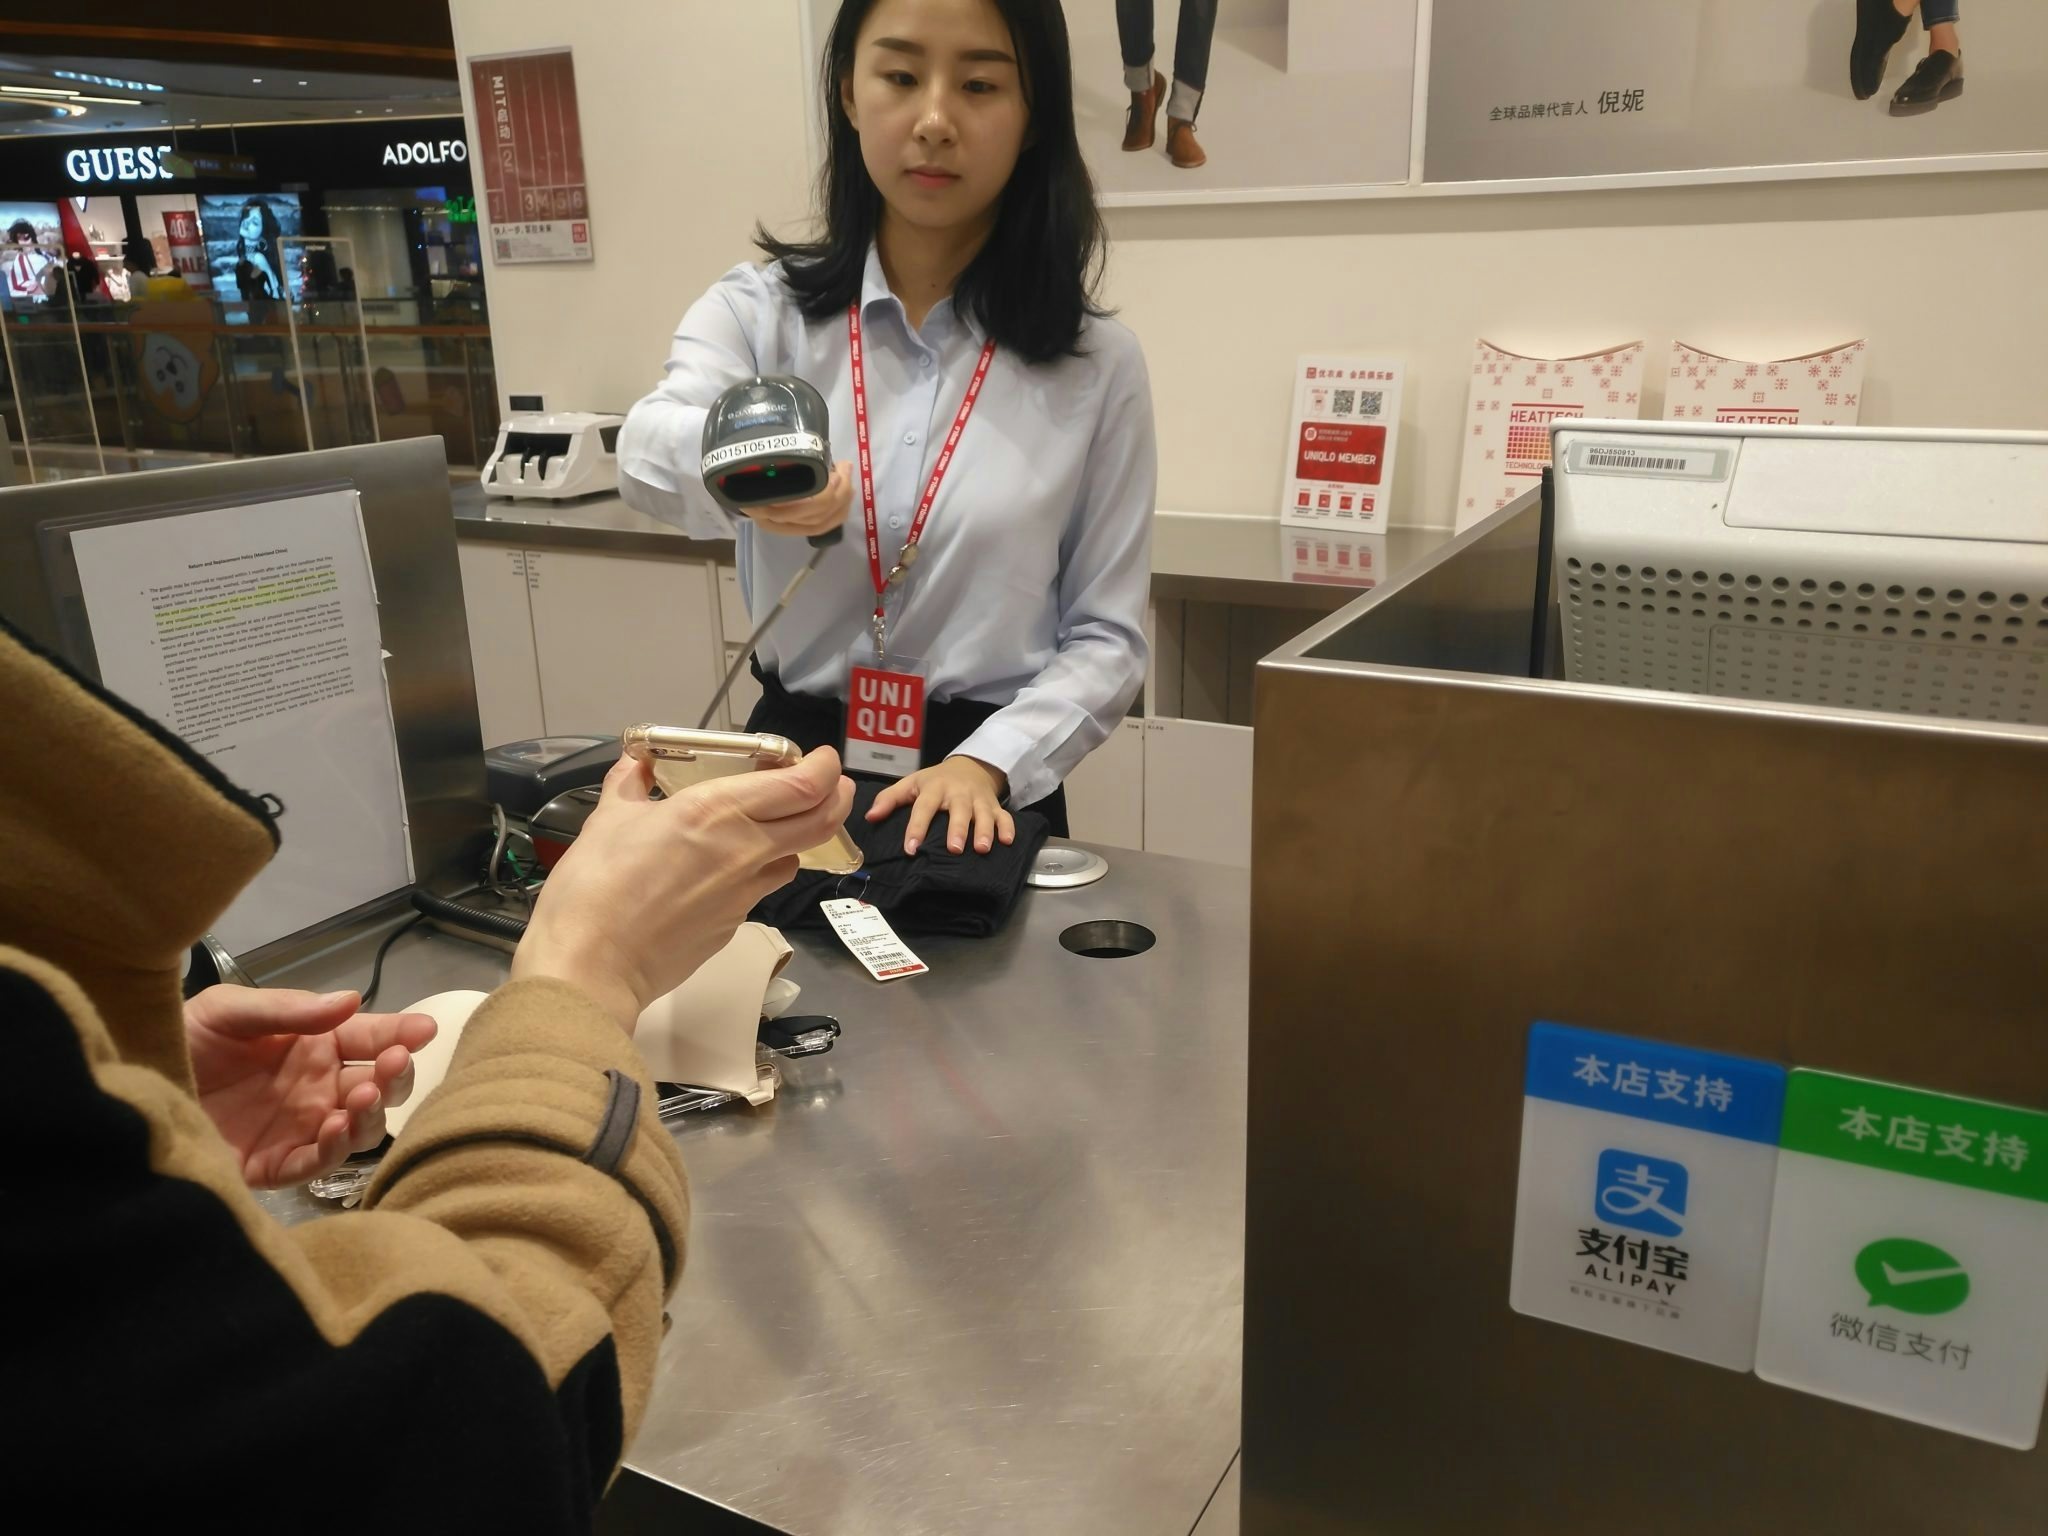 WeChat payment is widely accepted in Chinese retail stores. Photo: Shutterstock.com/Freer